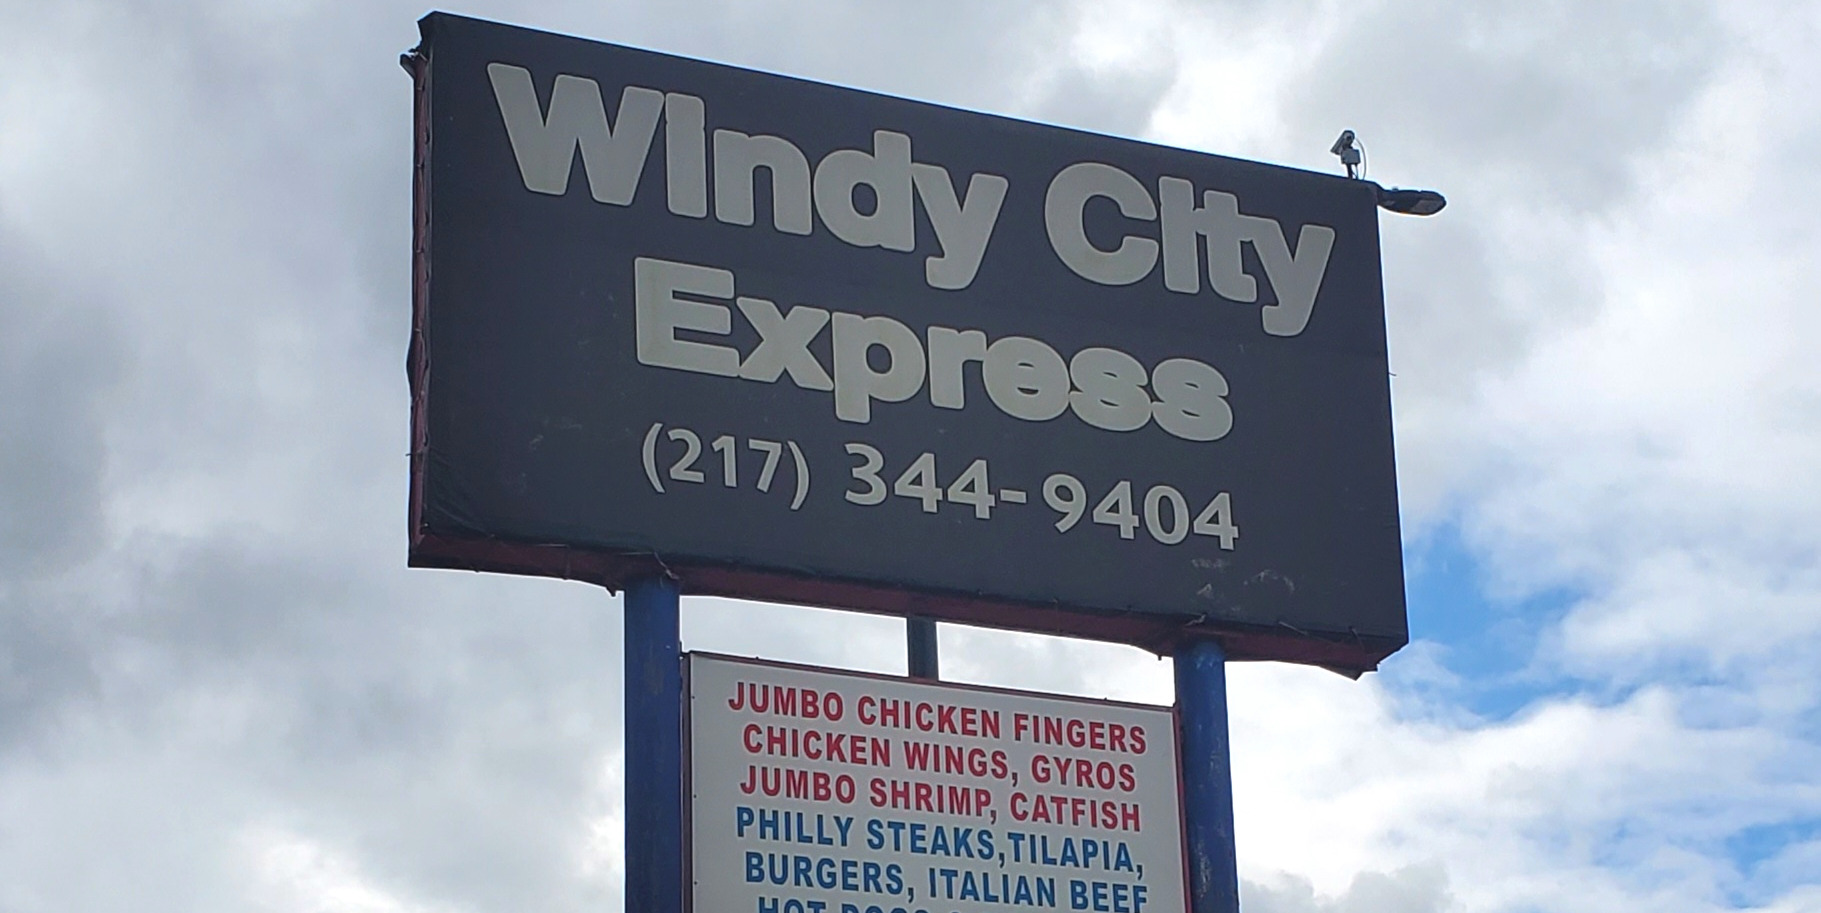 Windy City Express in Urbana's sign on a cloudy blue day. The sign also has the fast food restaurant's phone number and below it a list of the popular dishes. Photo by Carl Busch.